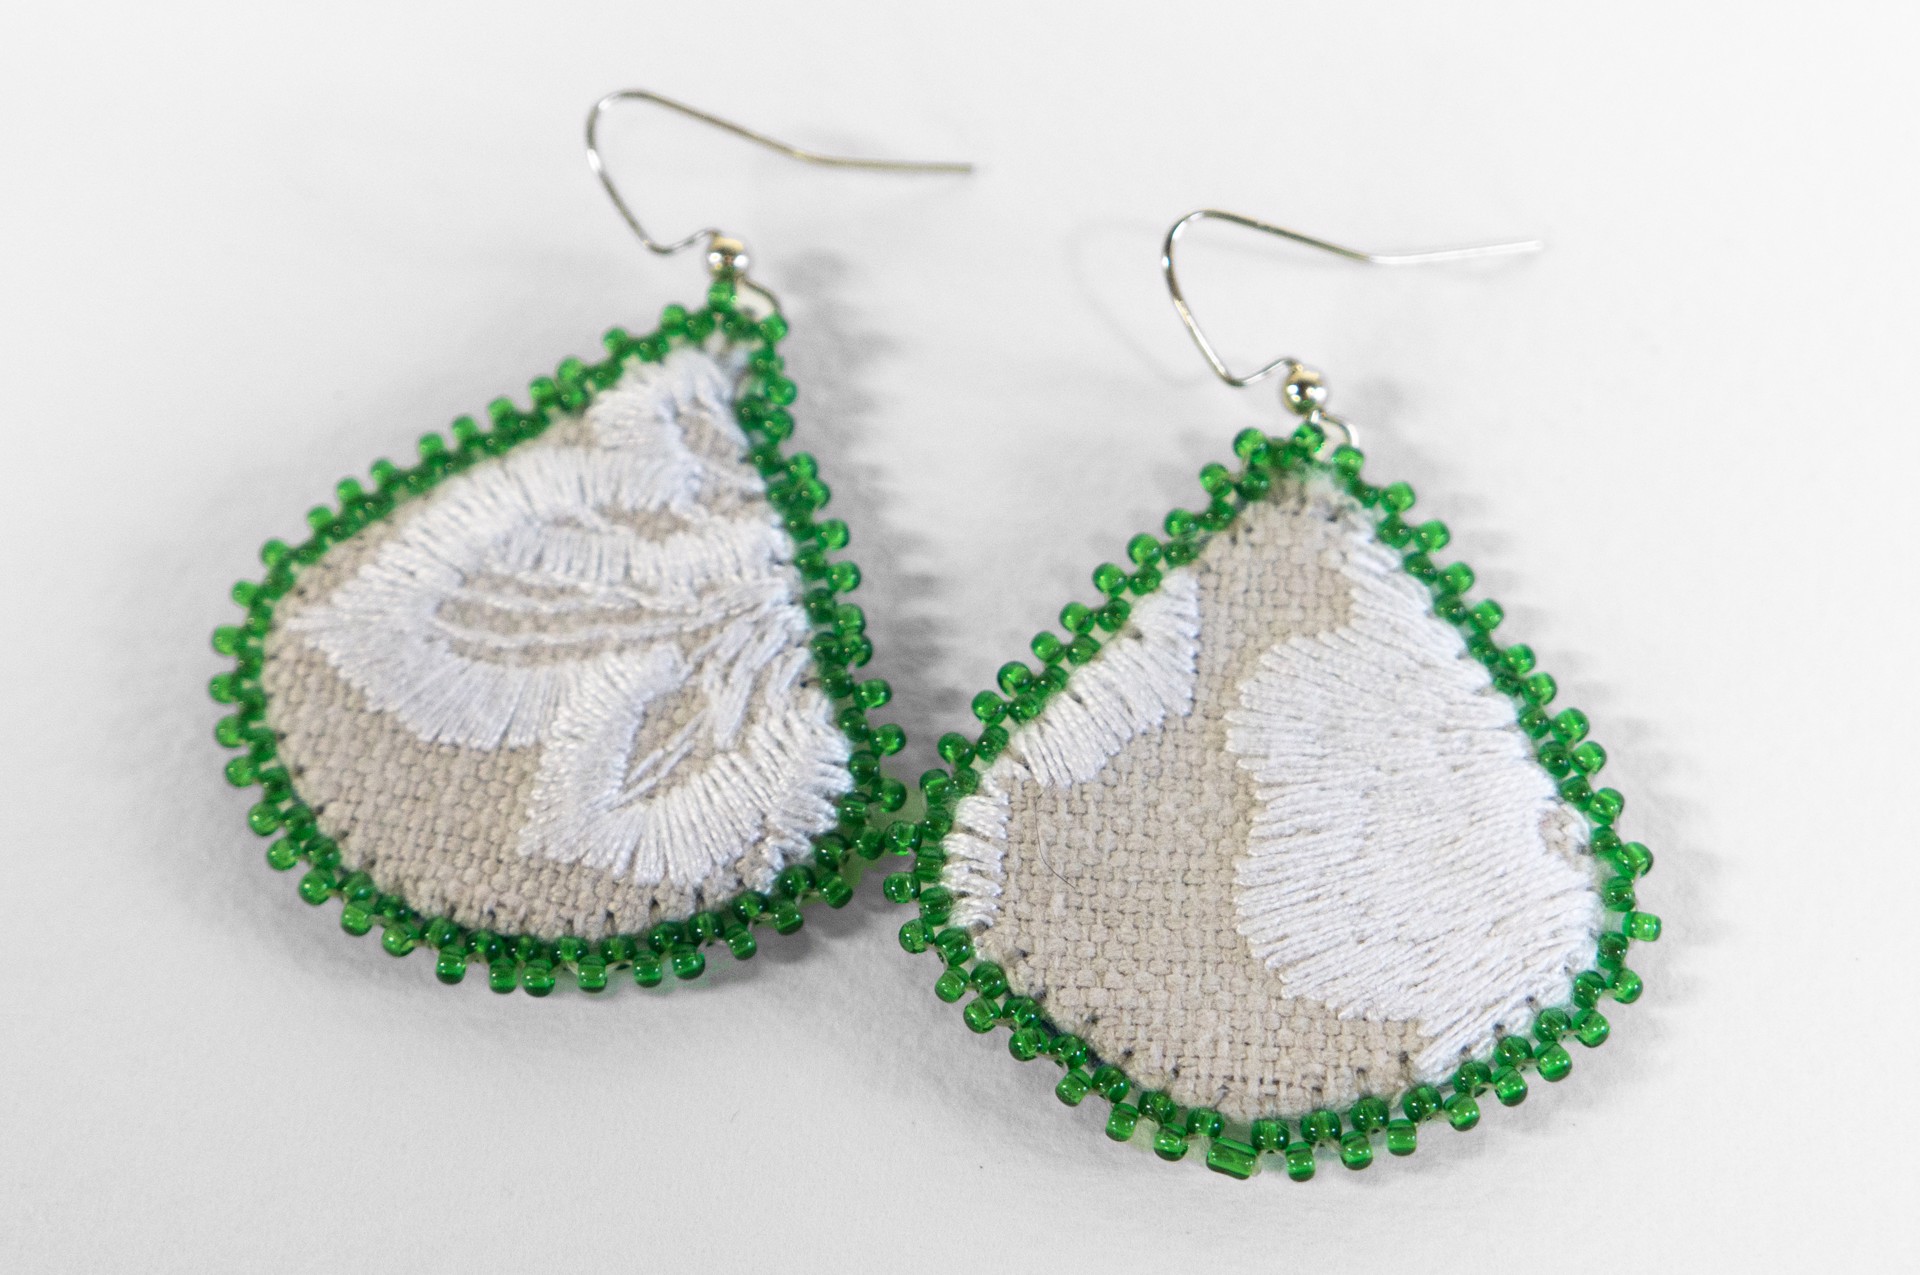 Green edge embroidered earrings by Hattie Lee Mendoza